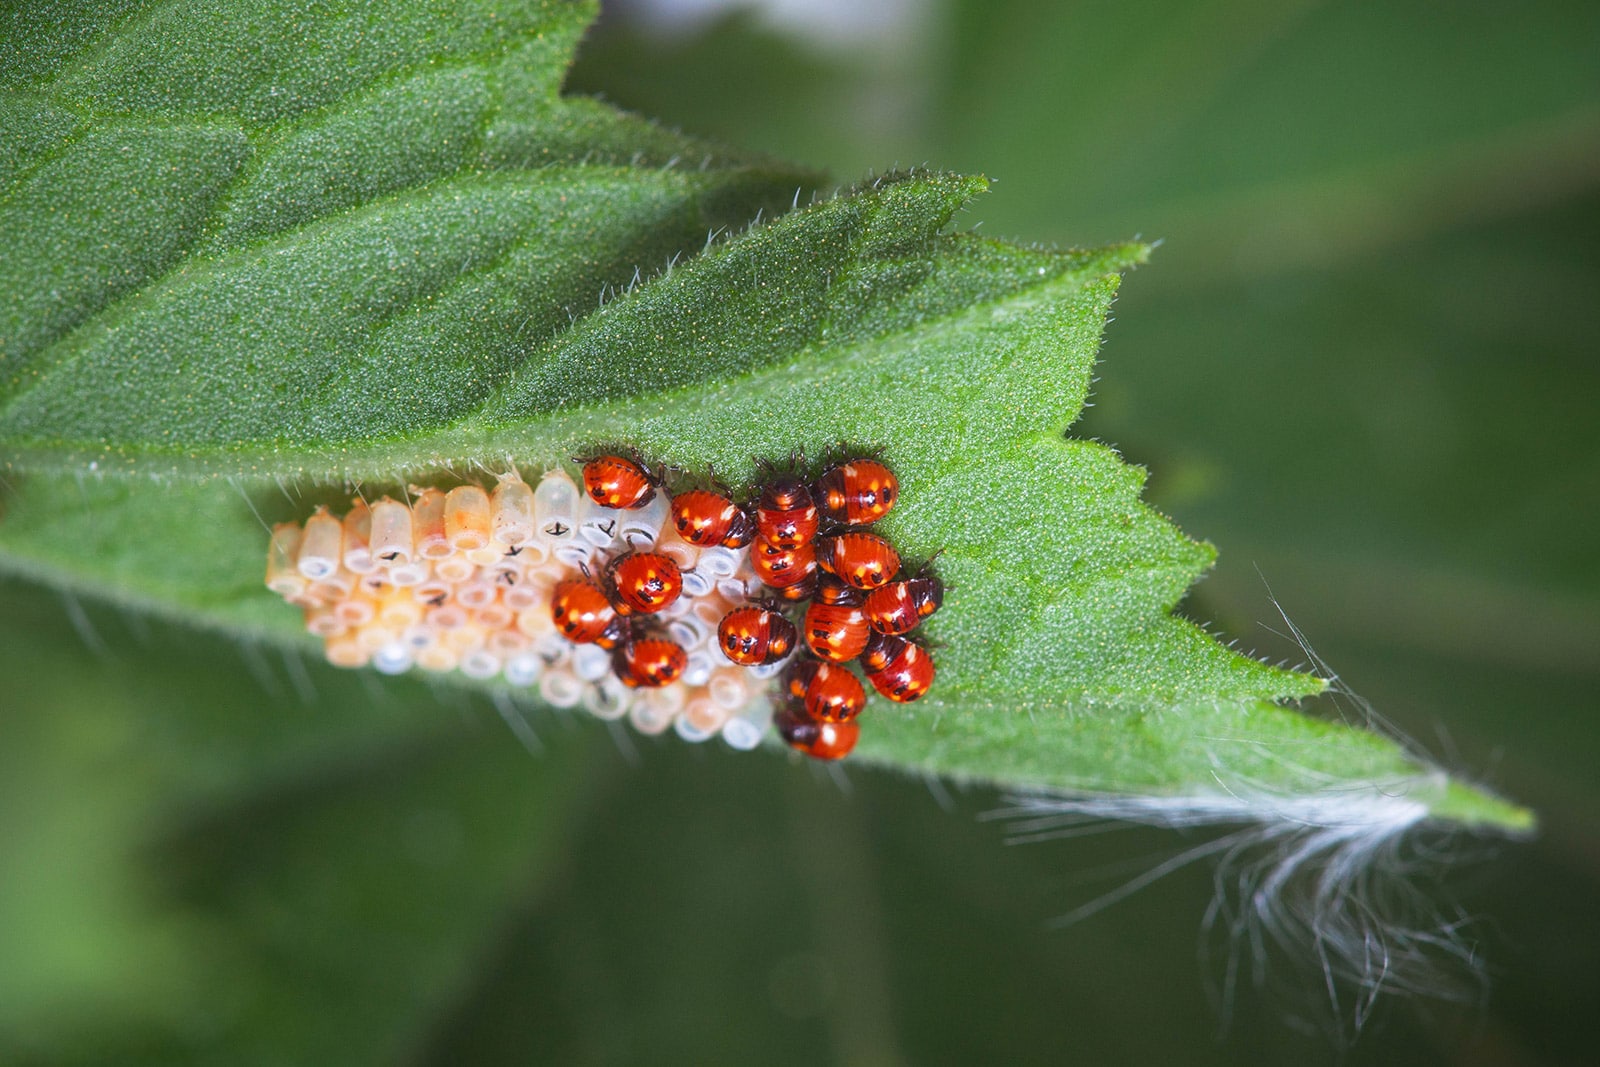 Cluster of ladybugs and ladybug eggs on the underside of a leaf